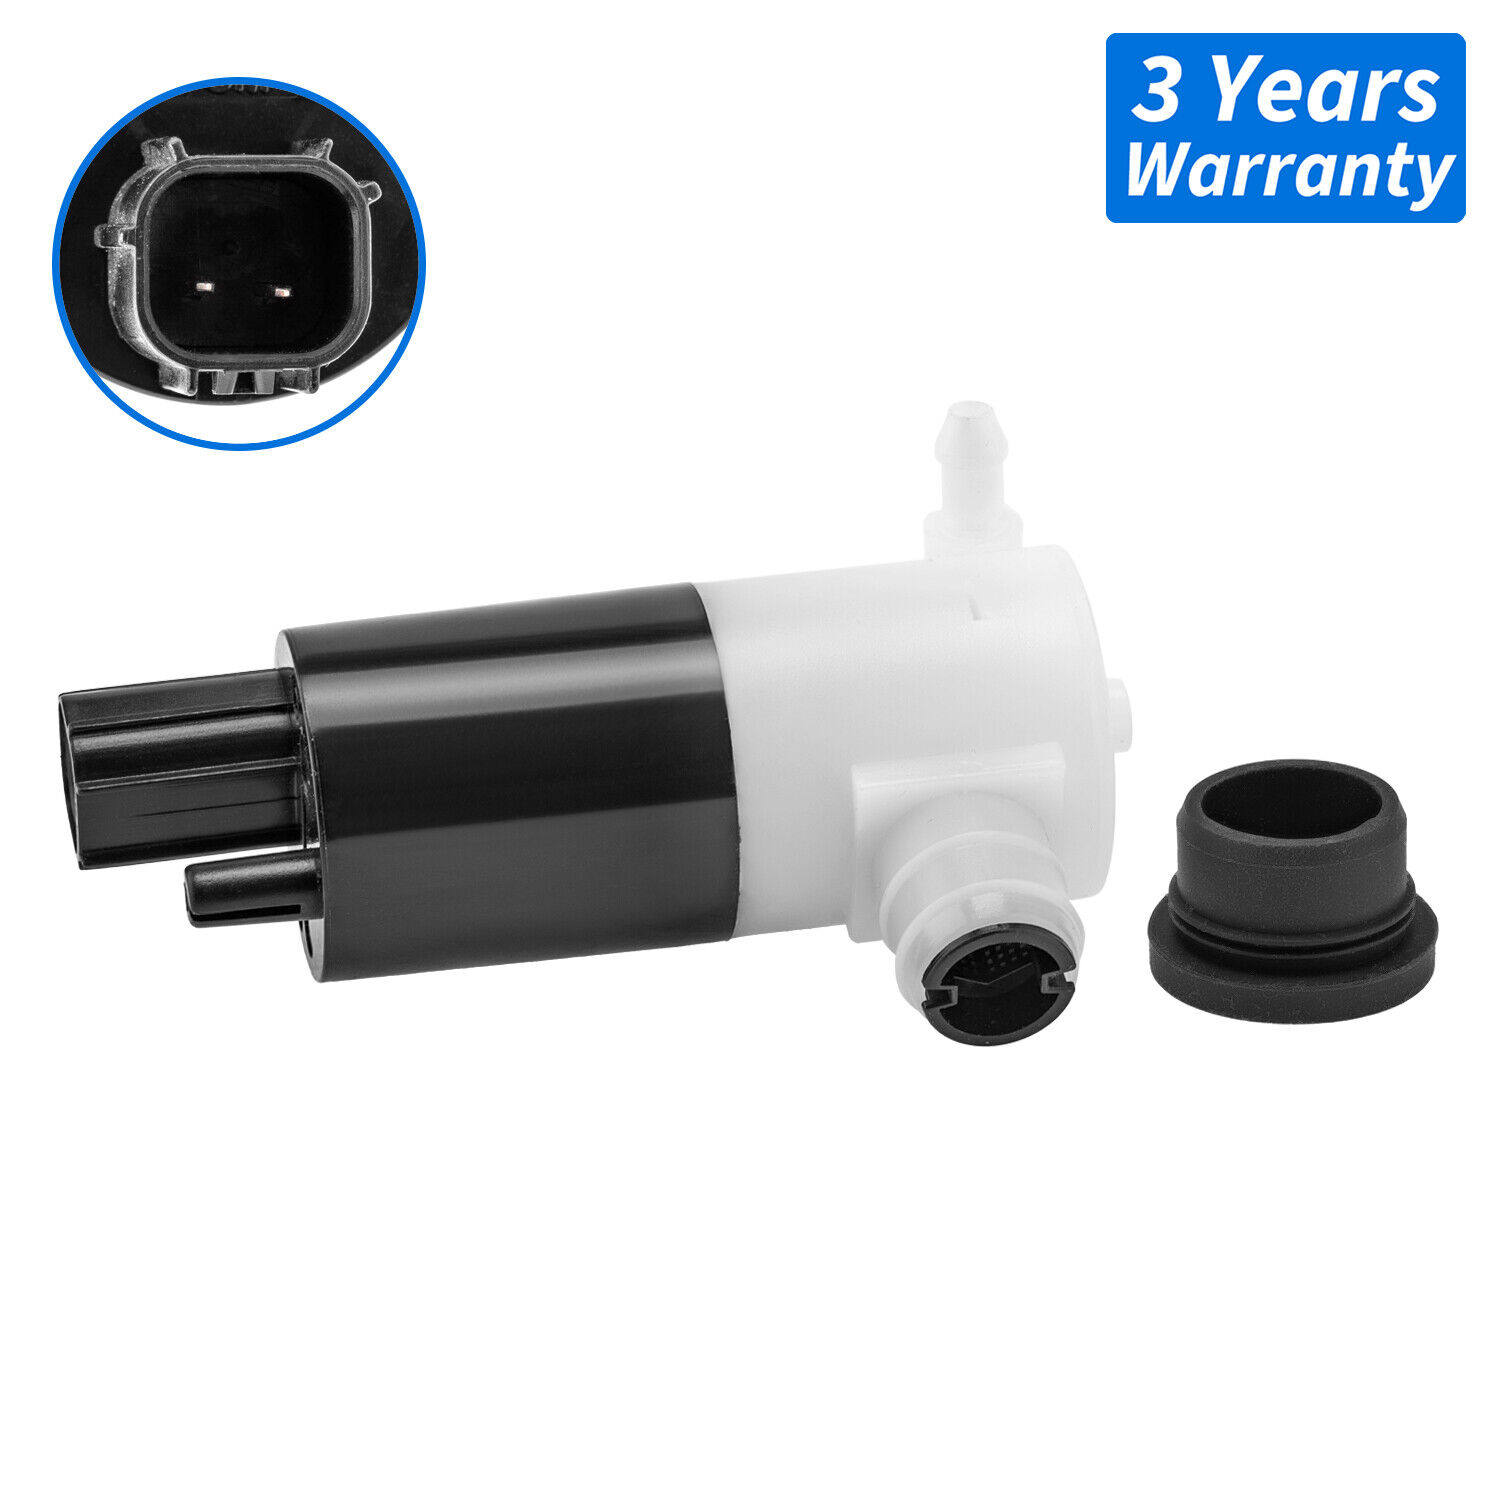 Windshield Washer Pump For Ford Fiesta Taurus Fusion Lincoln MKS Mercury Sable